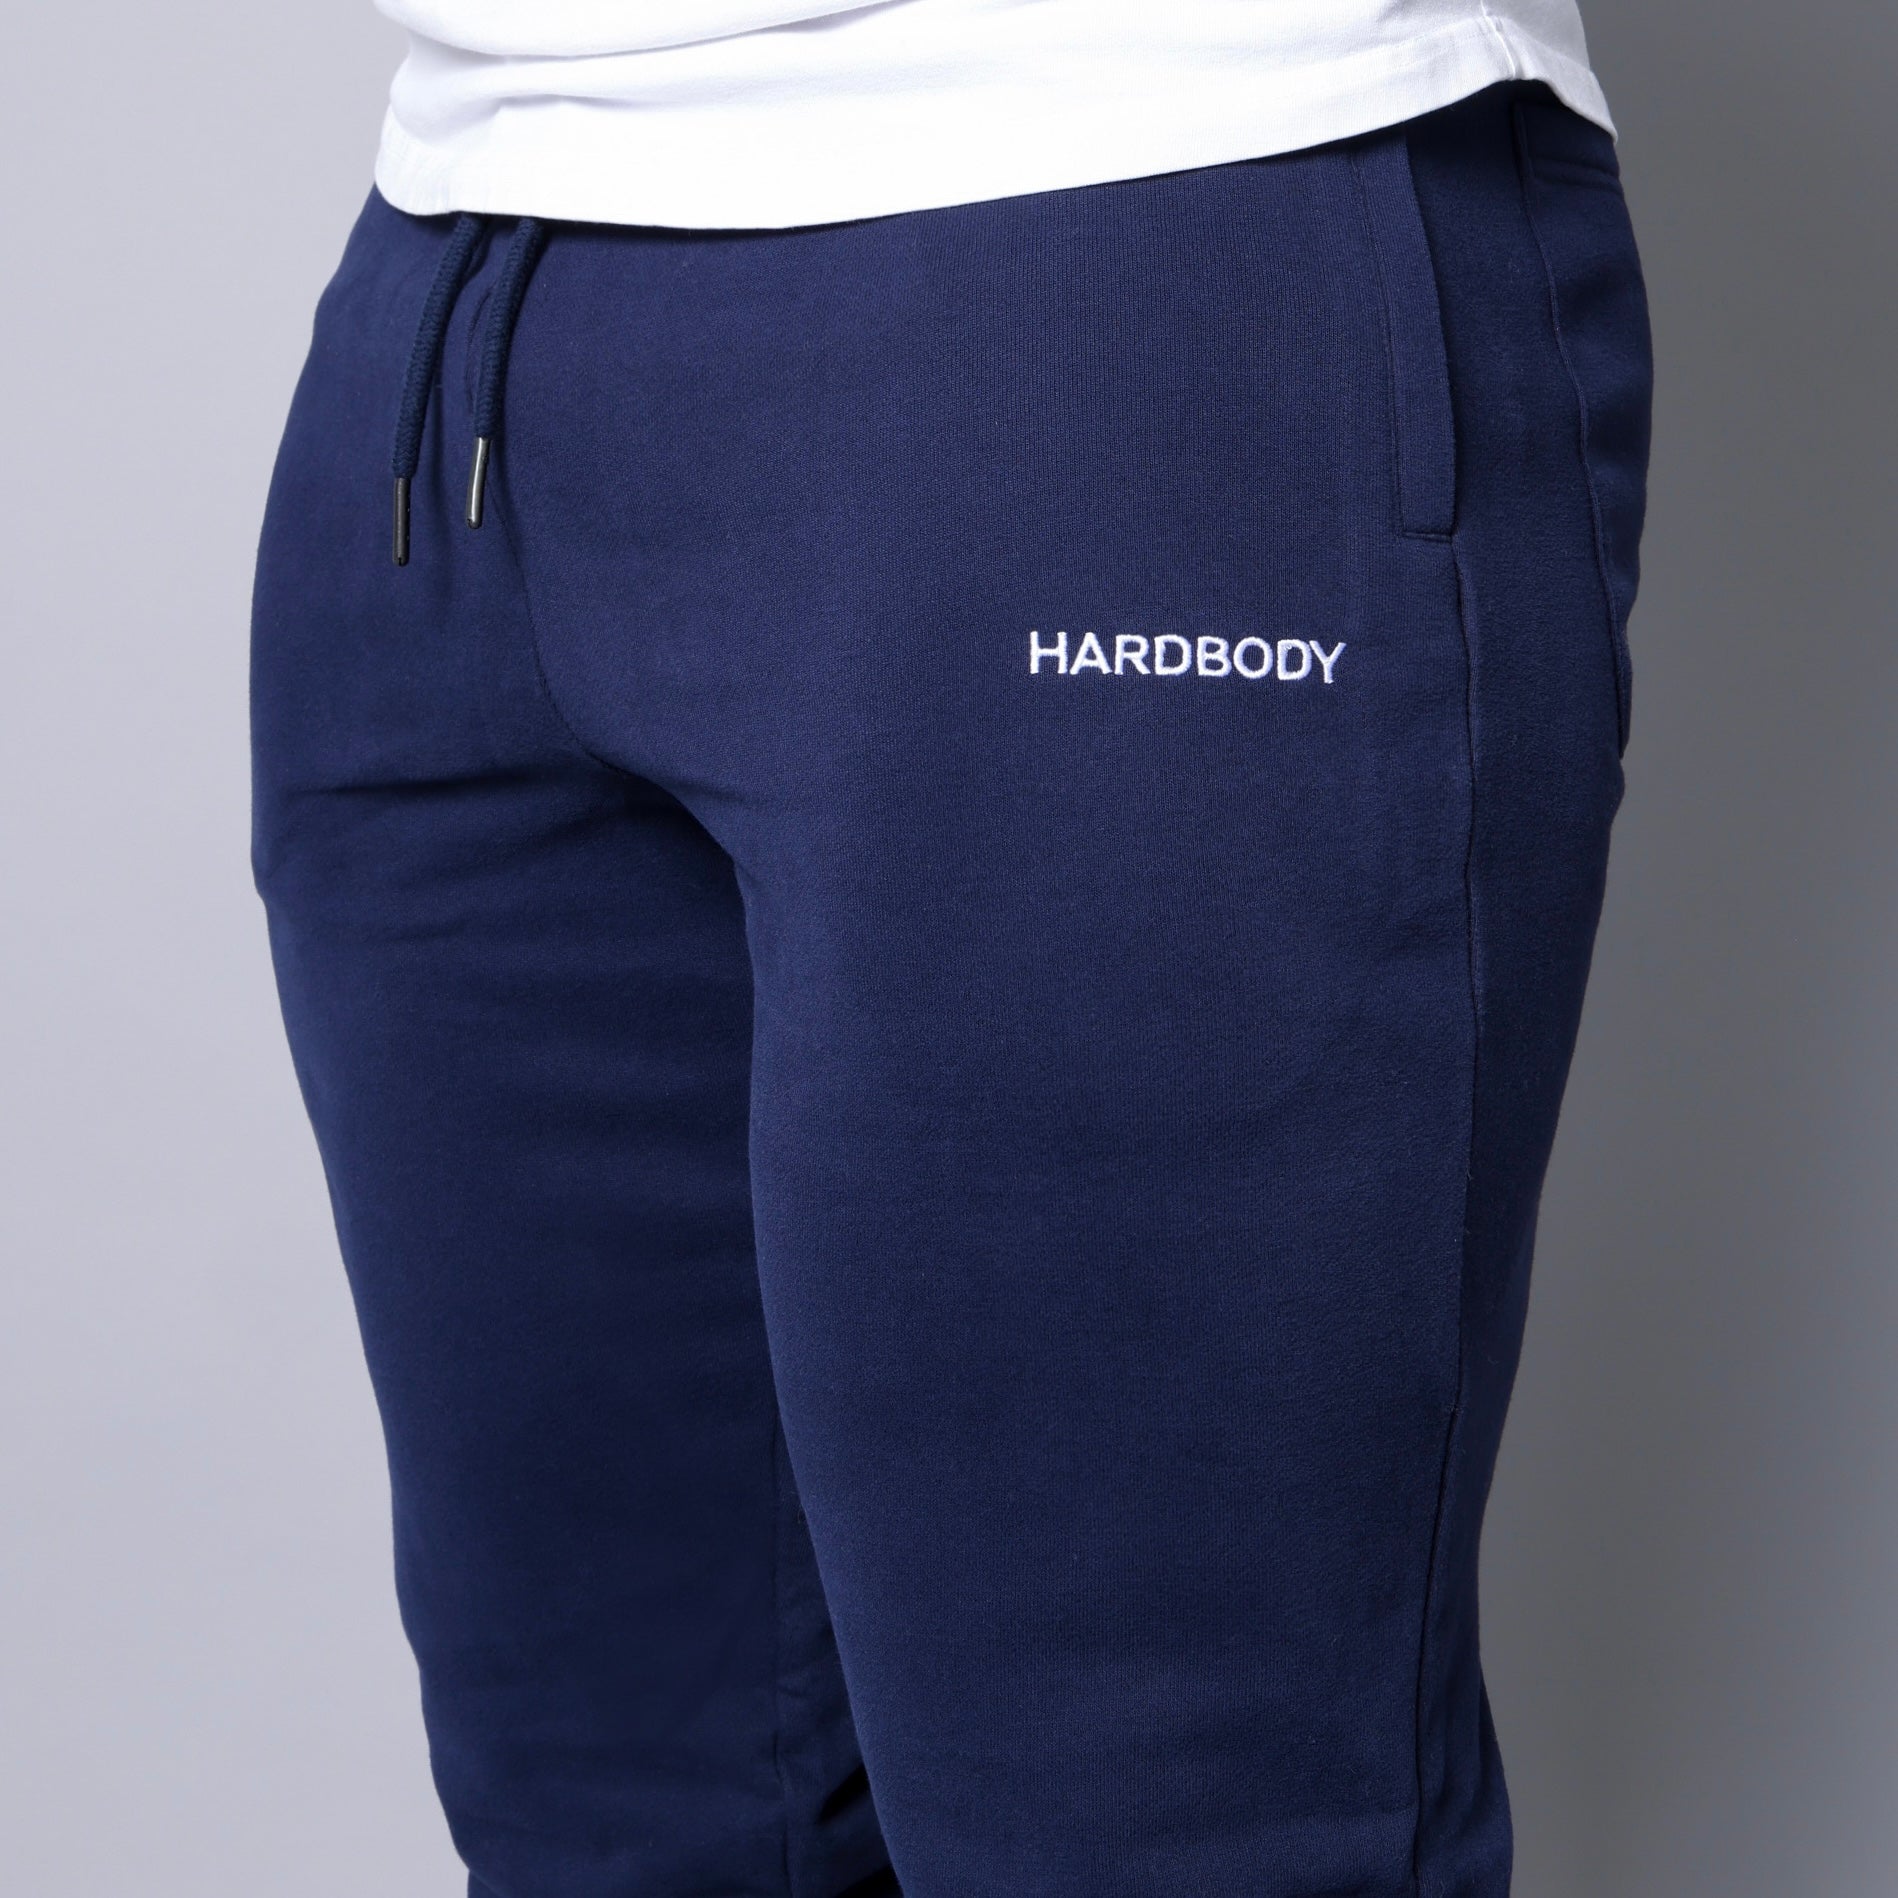 The Perfect Navy Jogger